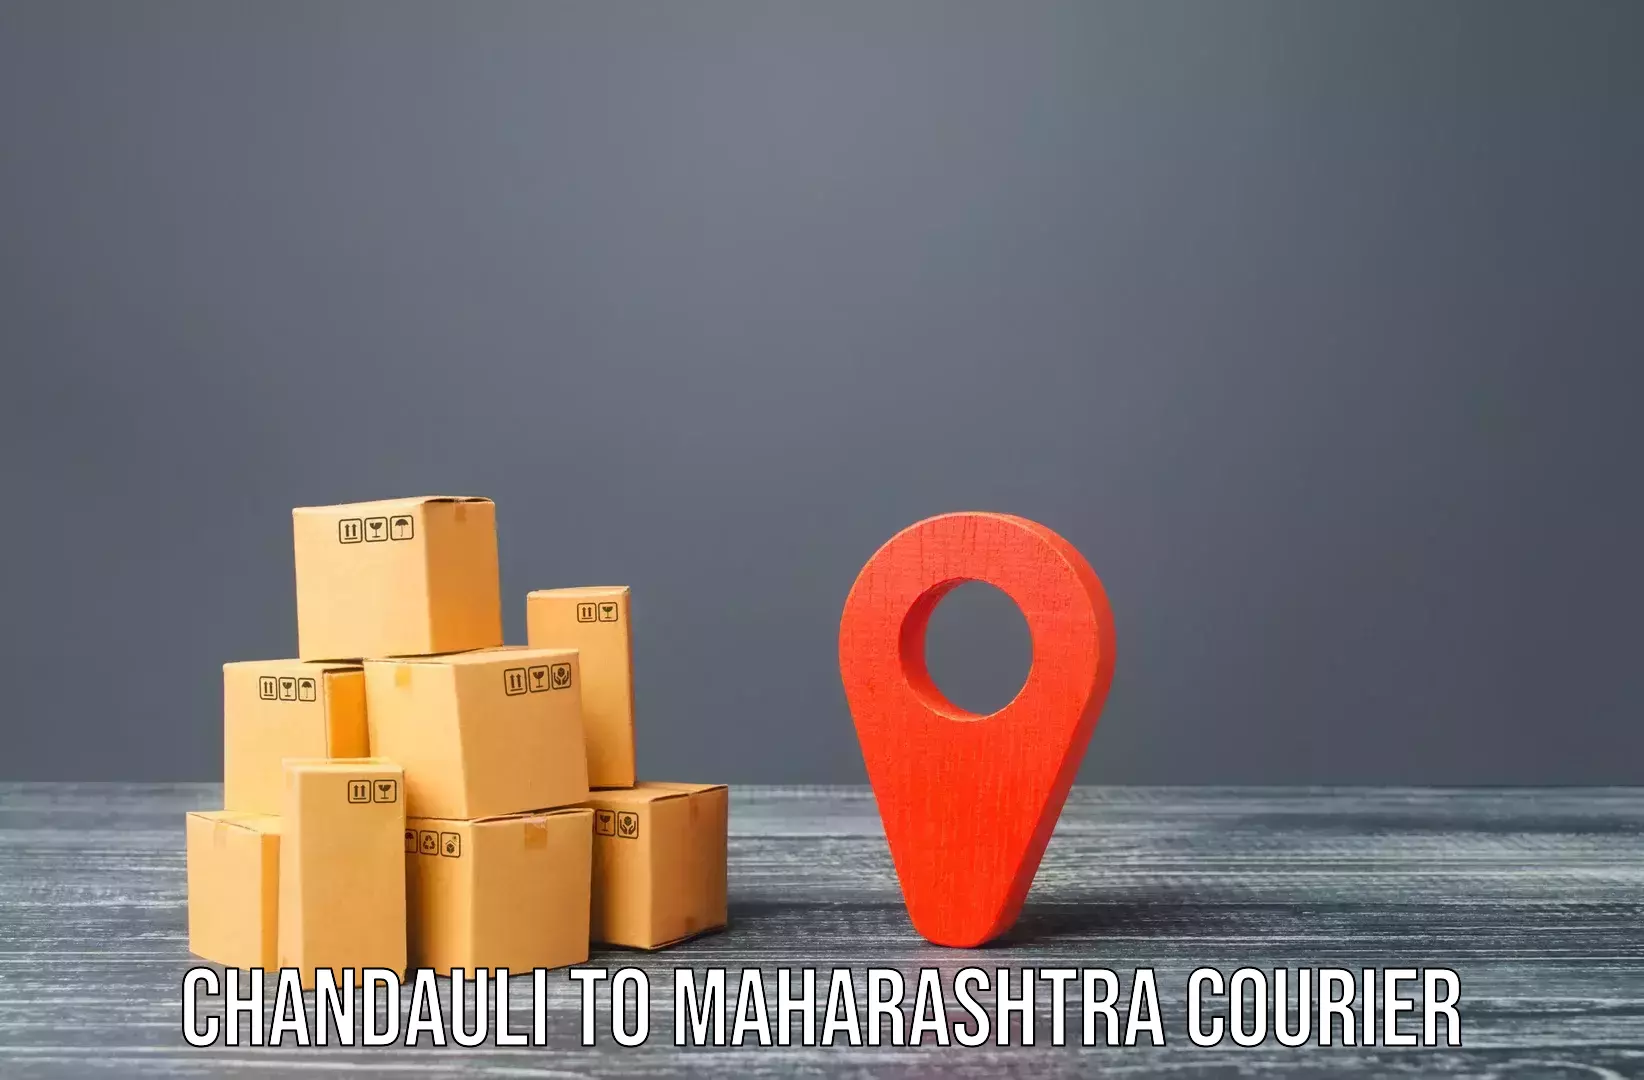 Quality relocation services Chandauli to Digras